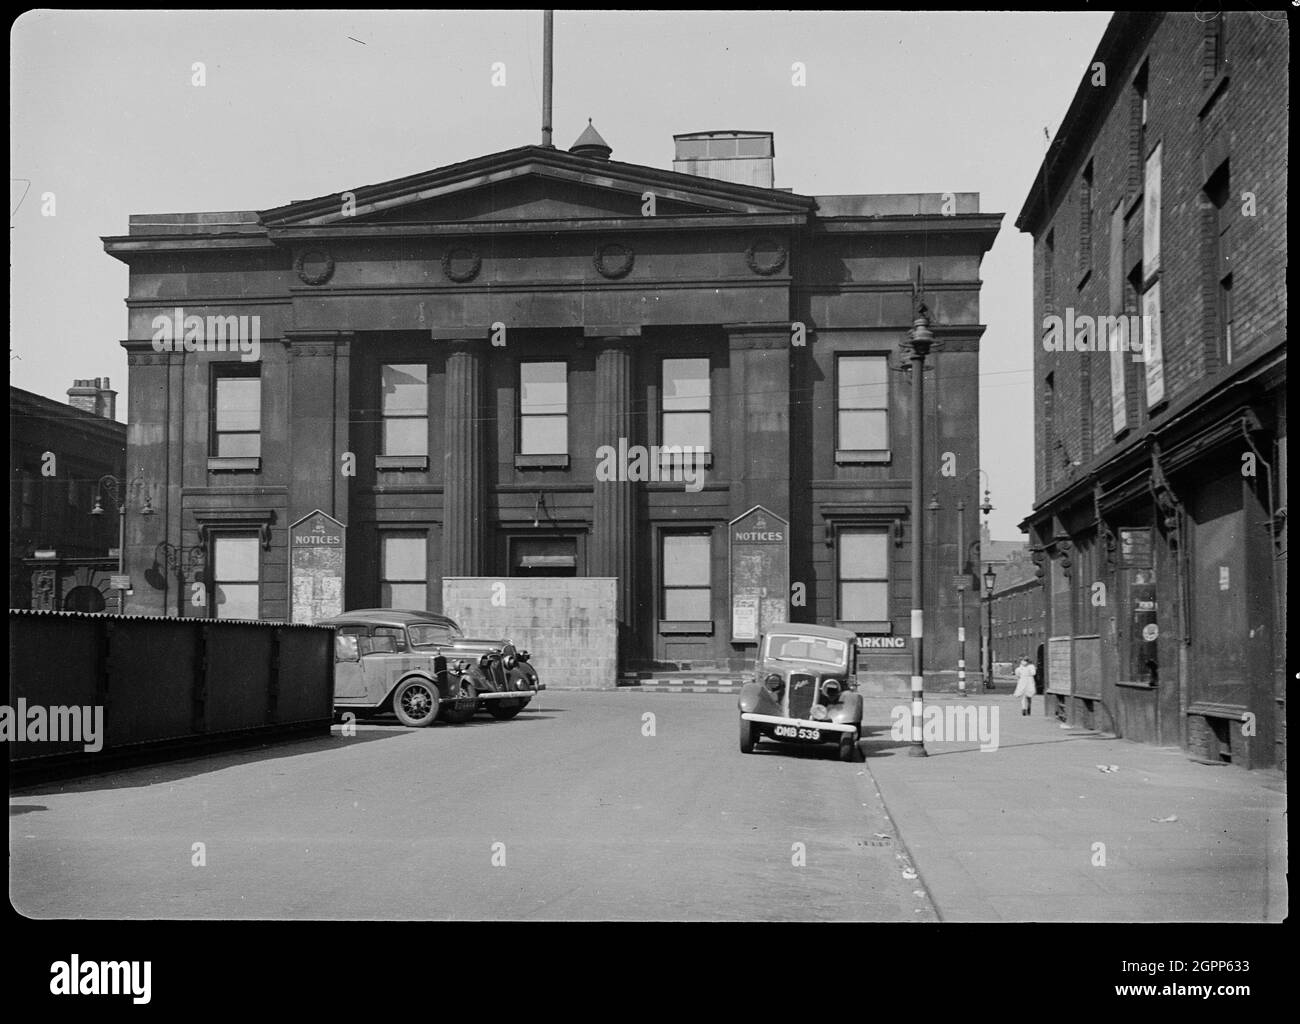 Town Hall, Bexley Square, Salford, 1942. An exterior view of the Town Hall, showing the south facade with two contemporary cars in the foreground. The hall was built by Richard Lane between 1825 and 1827, and the south facade has two storeys and five bays, with a three bay Doric portico with giant columns, a pediment and frieze with four relief wreaths. In the image the windows have blackout fabric covering them, and a temporary brick wall over the main entrance. The street furniture is painted with black and white stripes, to faciliate night-time driving during World War II. Stock Photo